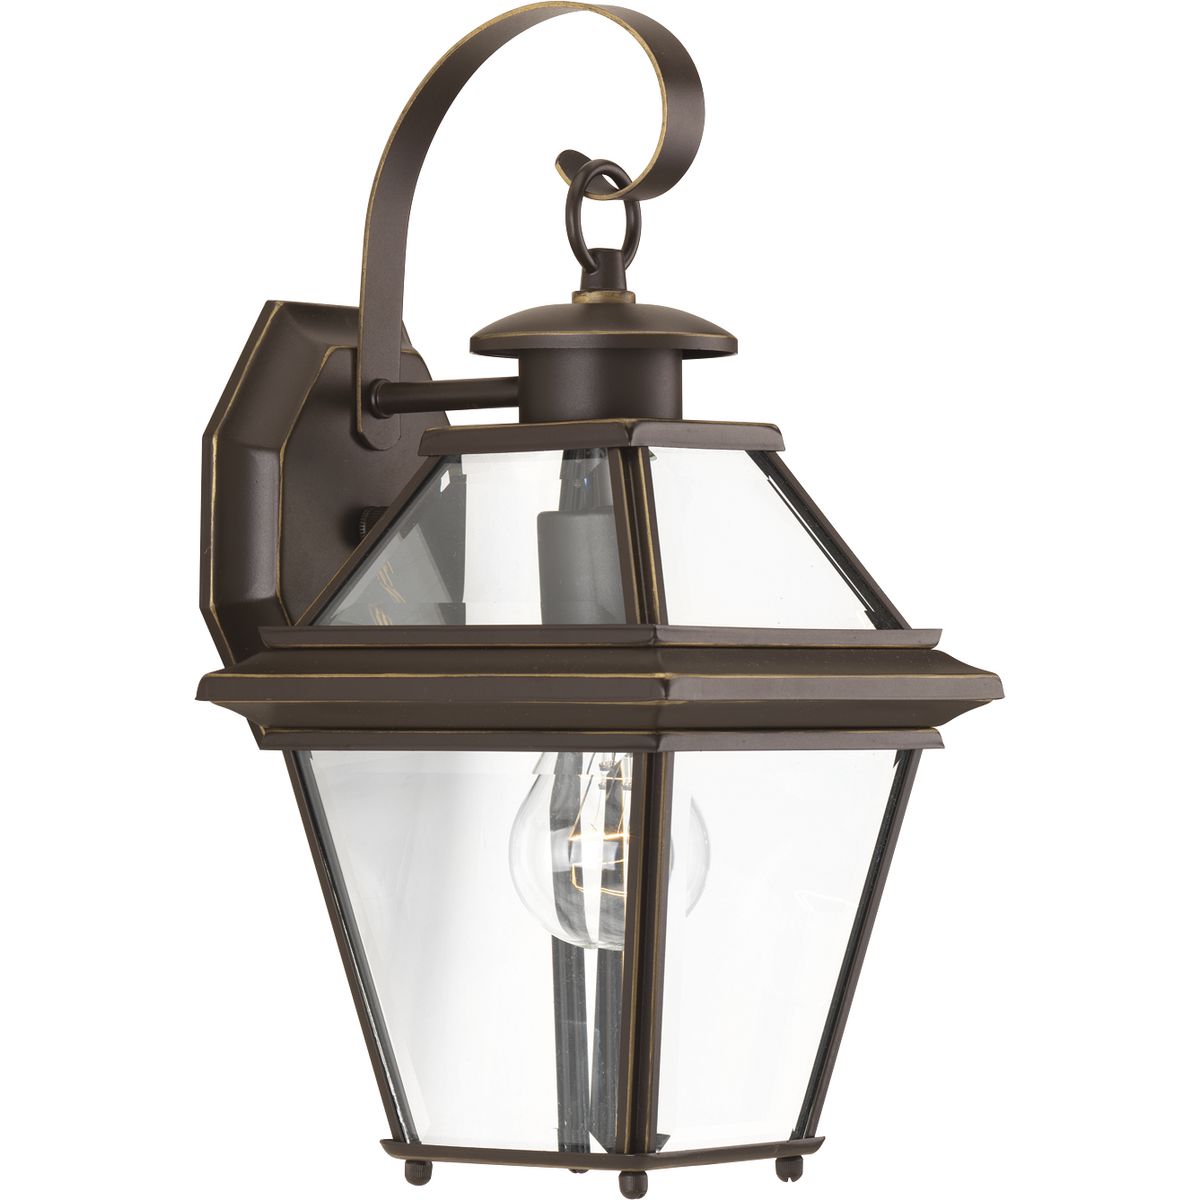 The one-light wall lantern from the Burlington outdoor collection is constructed from aluminum for durable, weather-resistant performance. An Antique Bronze finish complements the clear beveled glass. Open bottom design allows individuals to replace lamps without removing any glass shade.